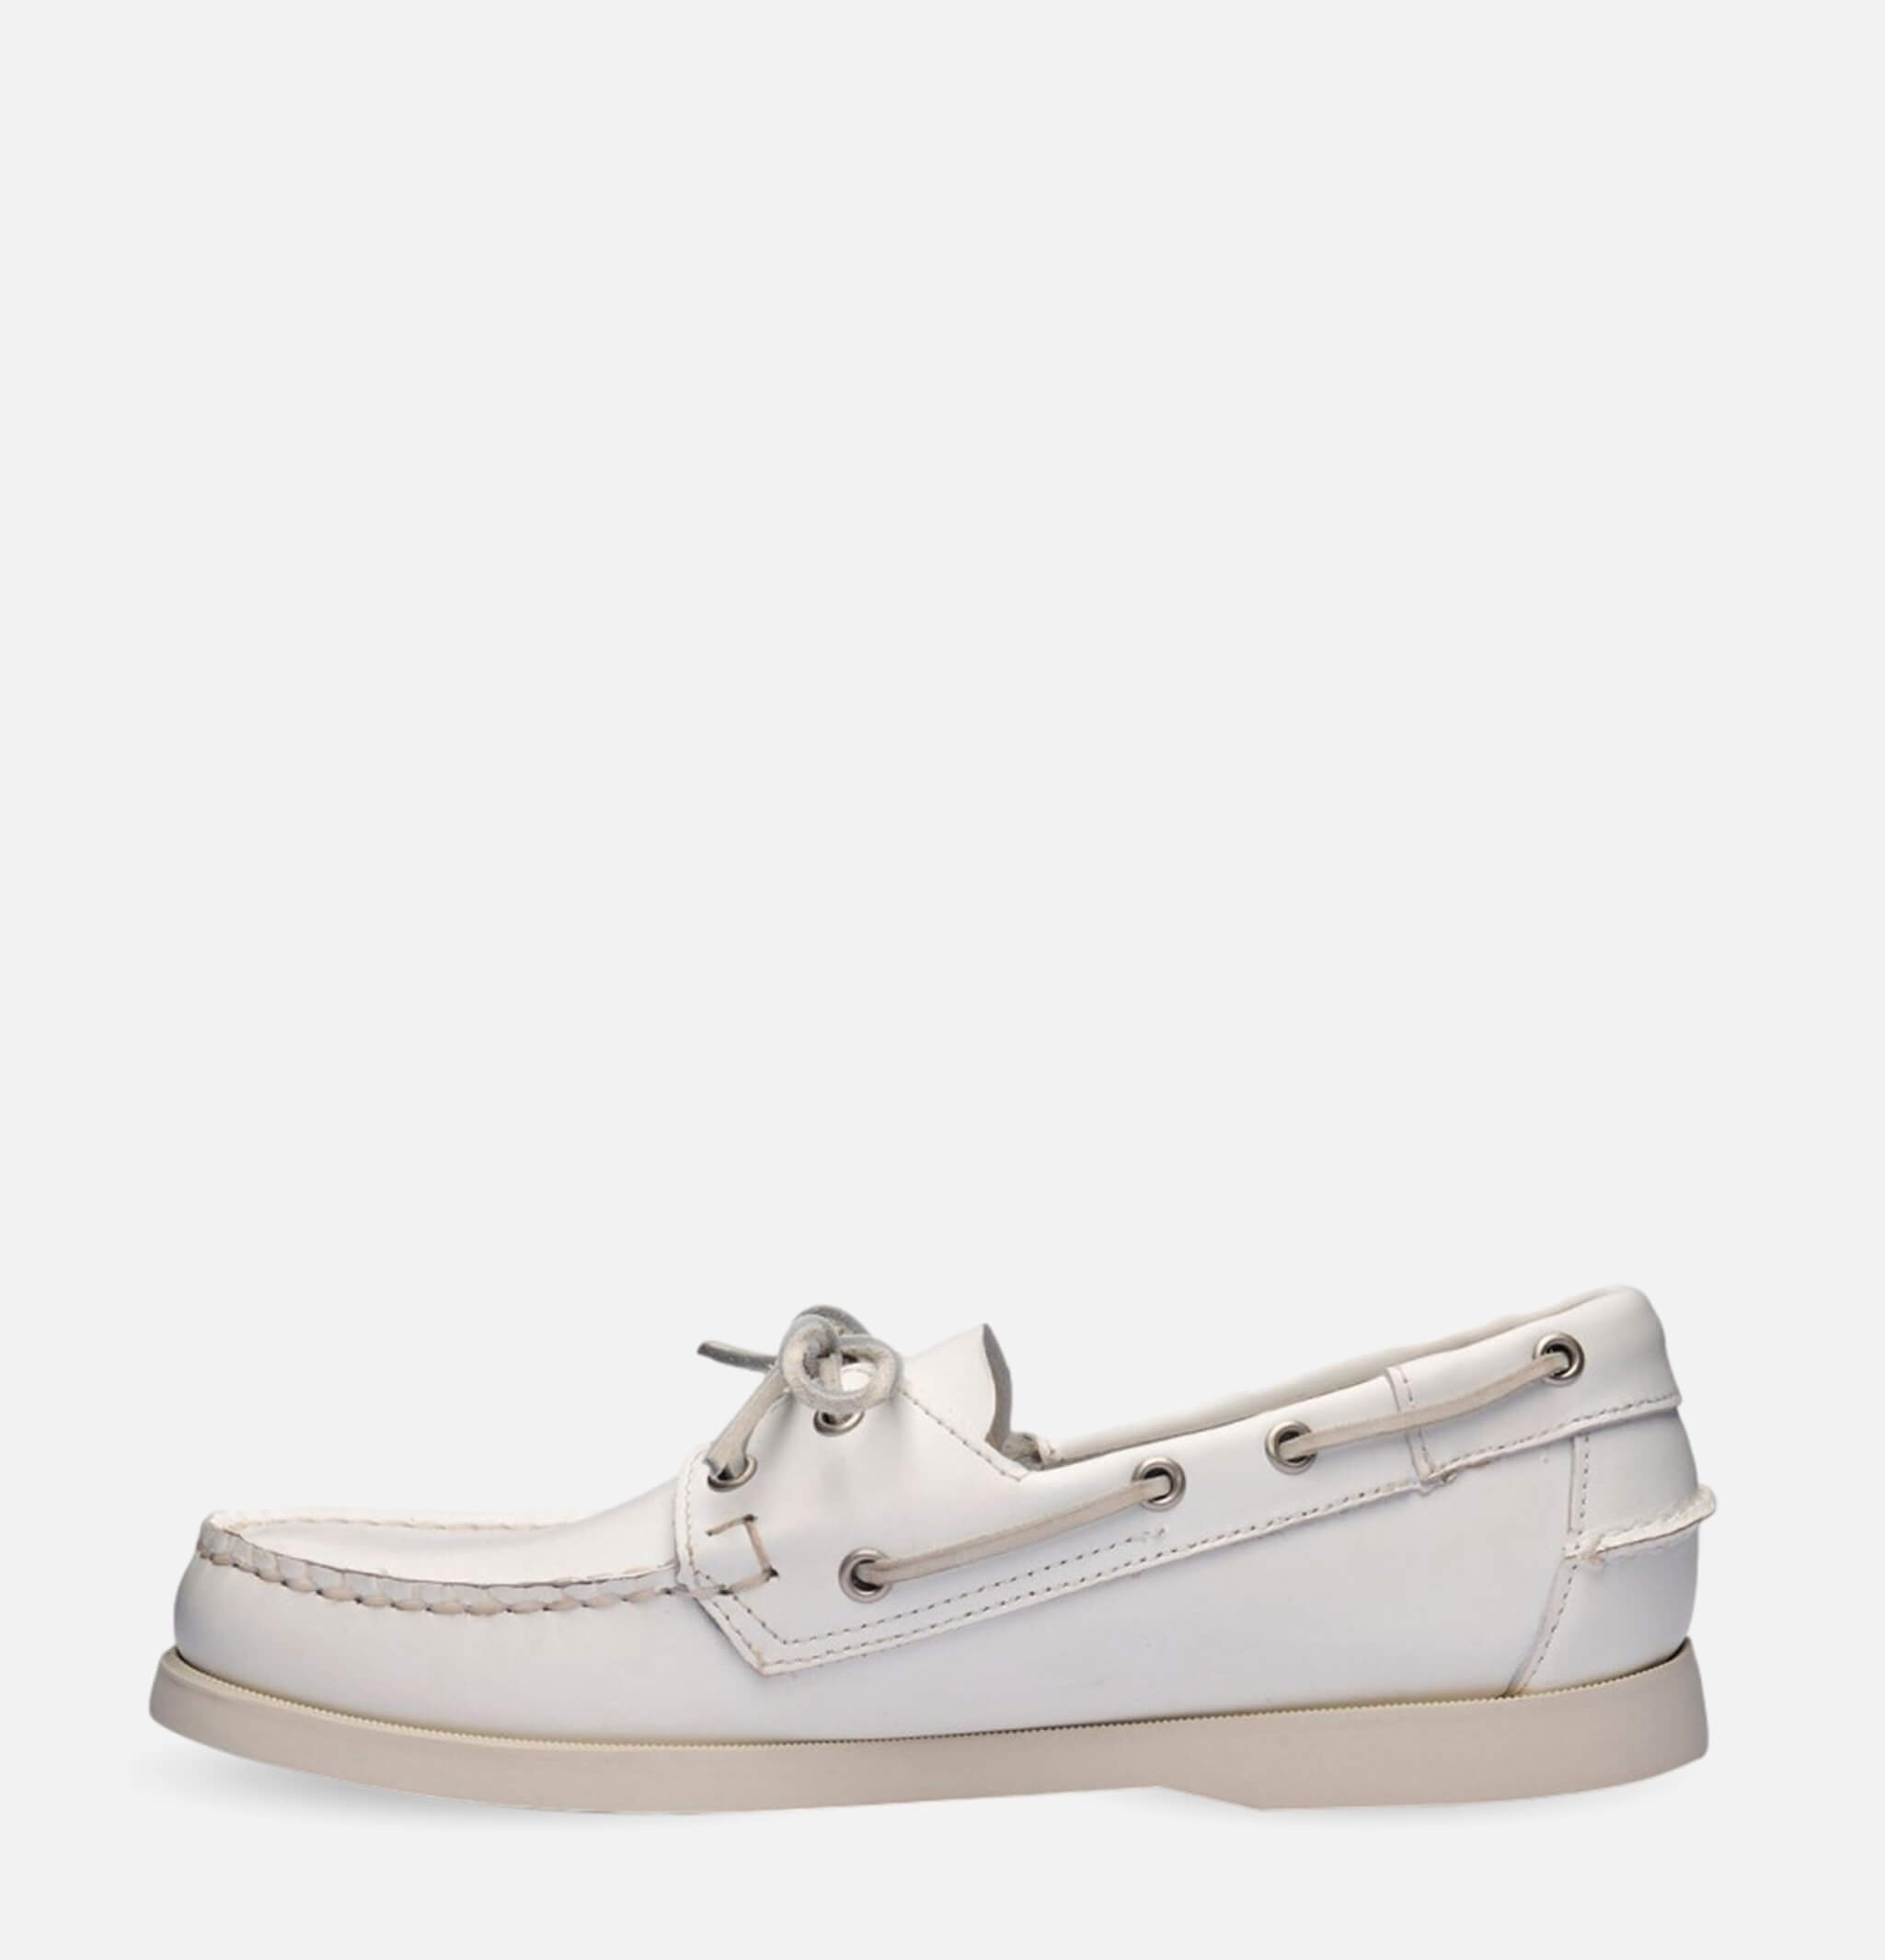 Docksides Shoes White